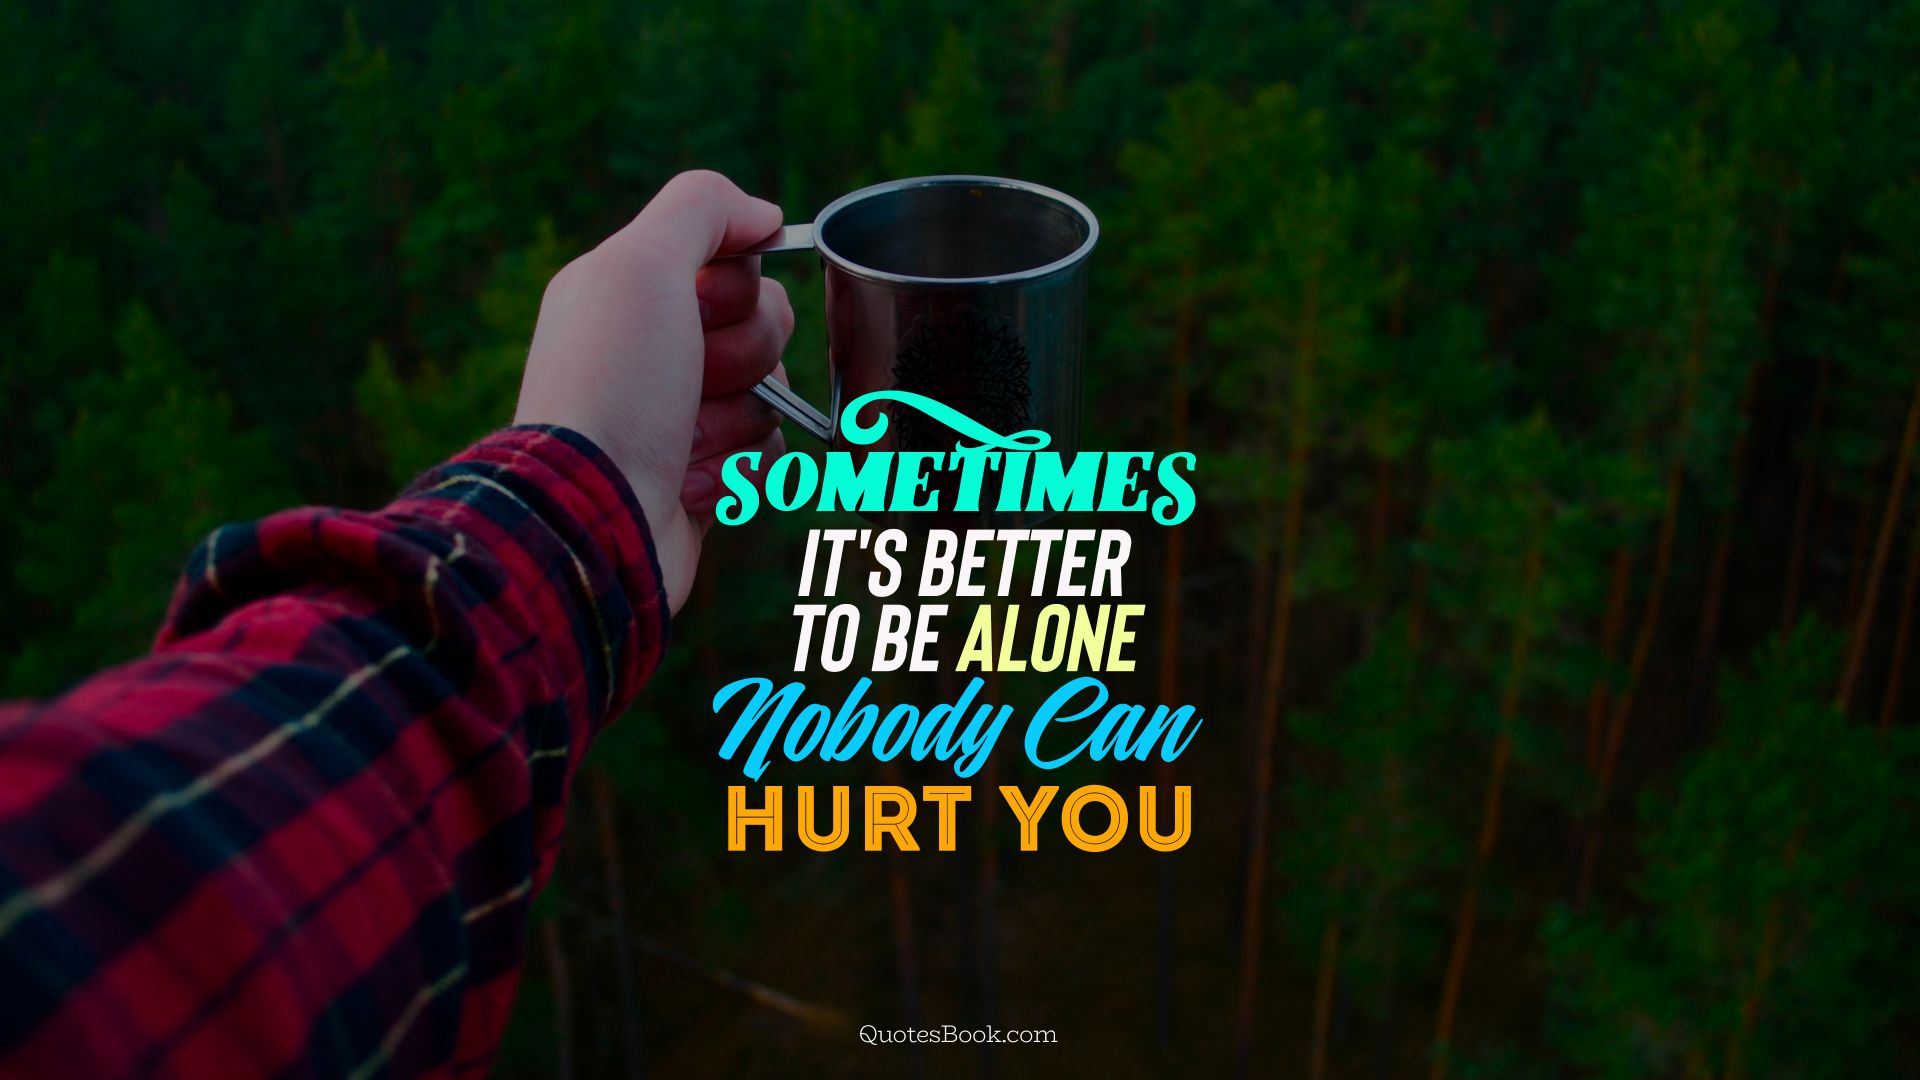 Sometimes it's better to be alone nobody can hurt you